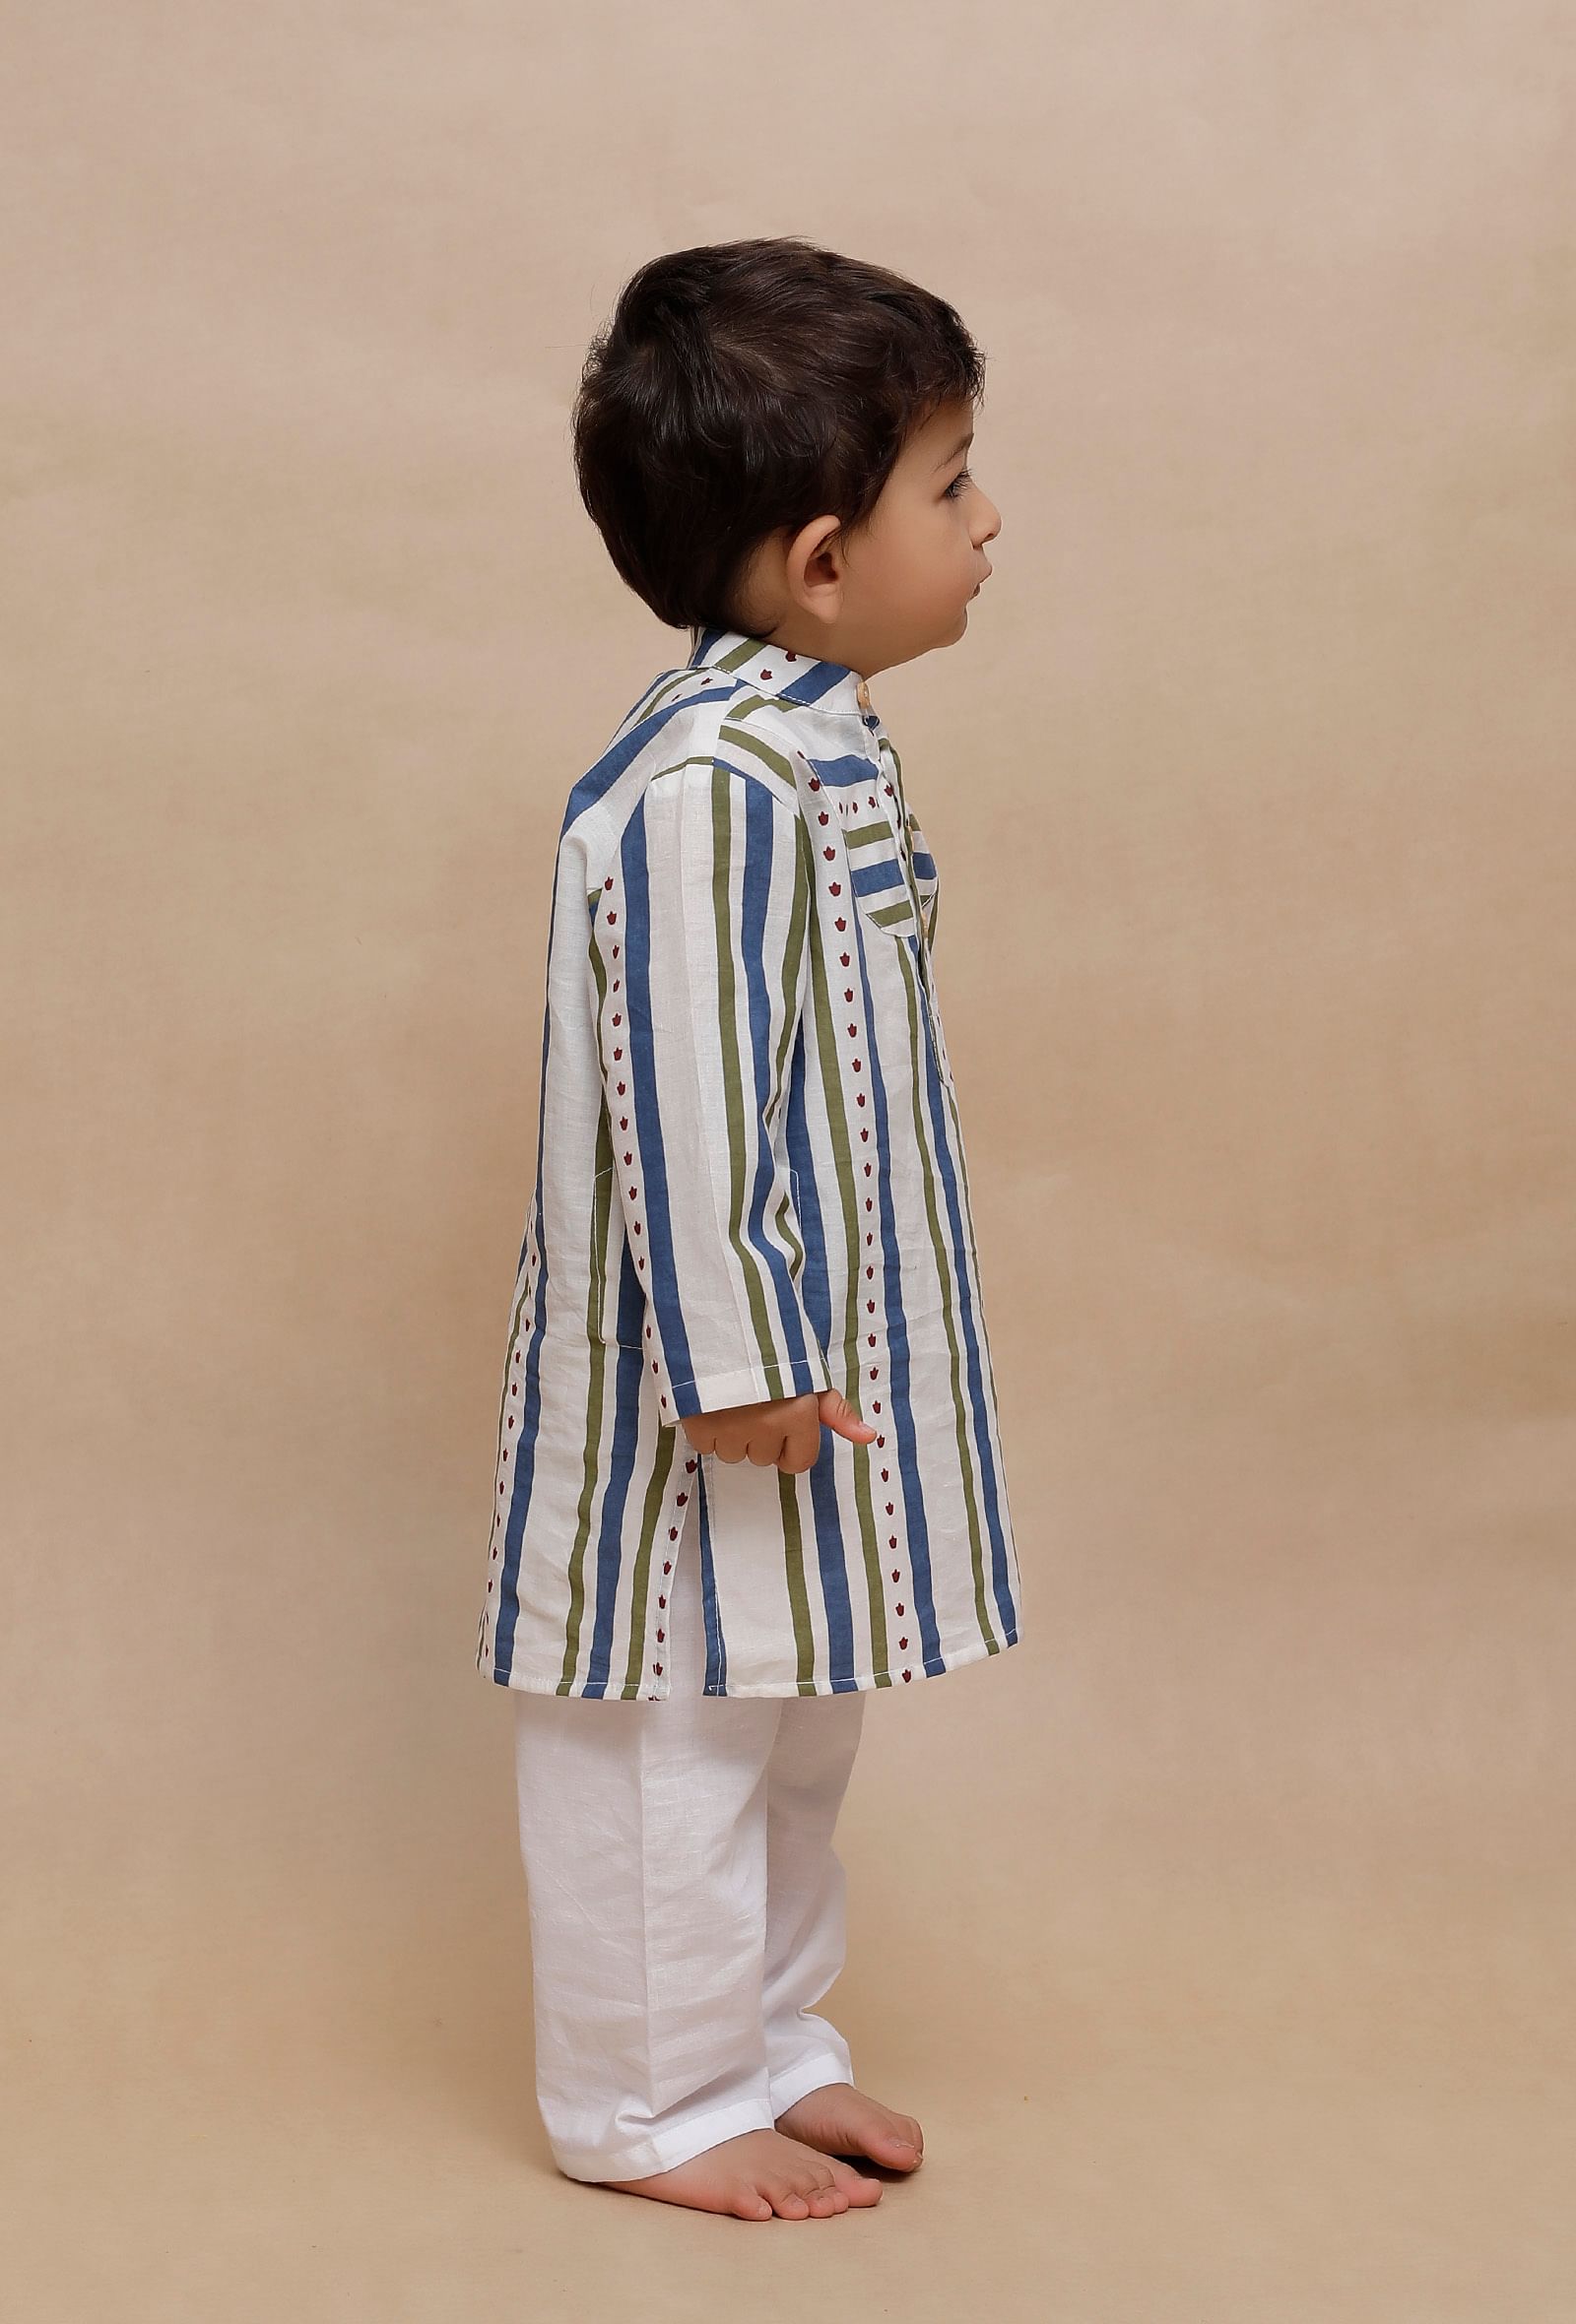 Set of 2: Off-White Multi Color Striped Kurta with off-white Pant